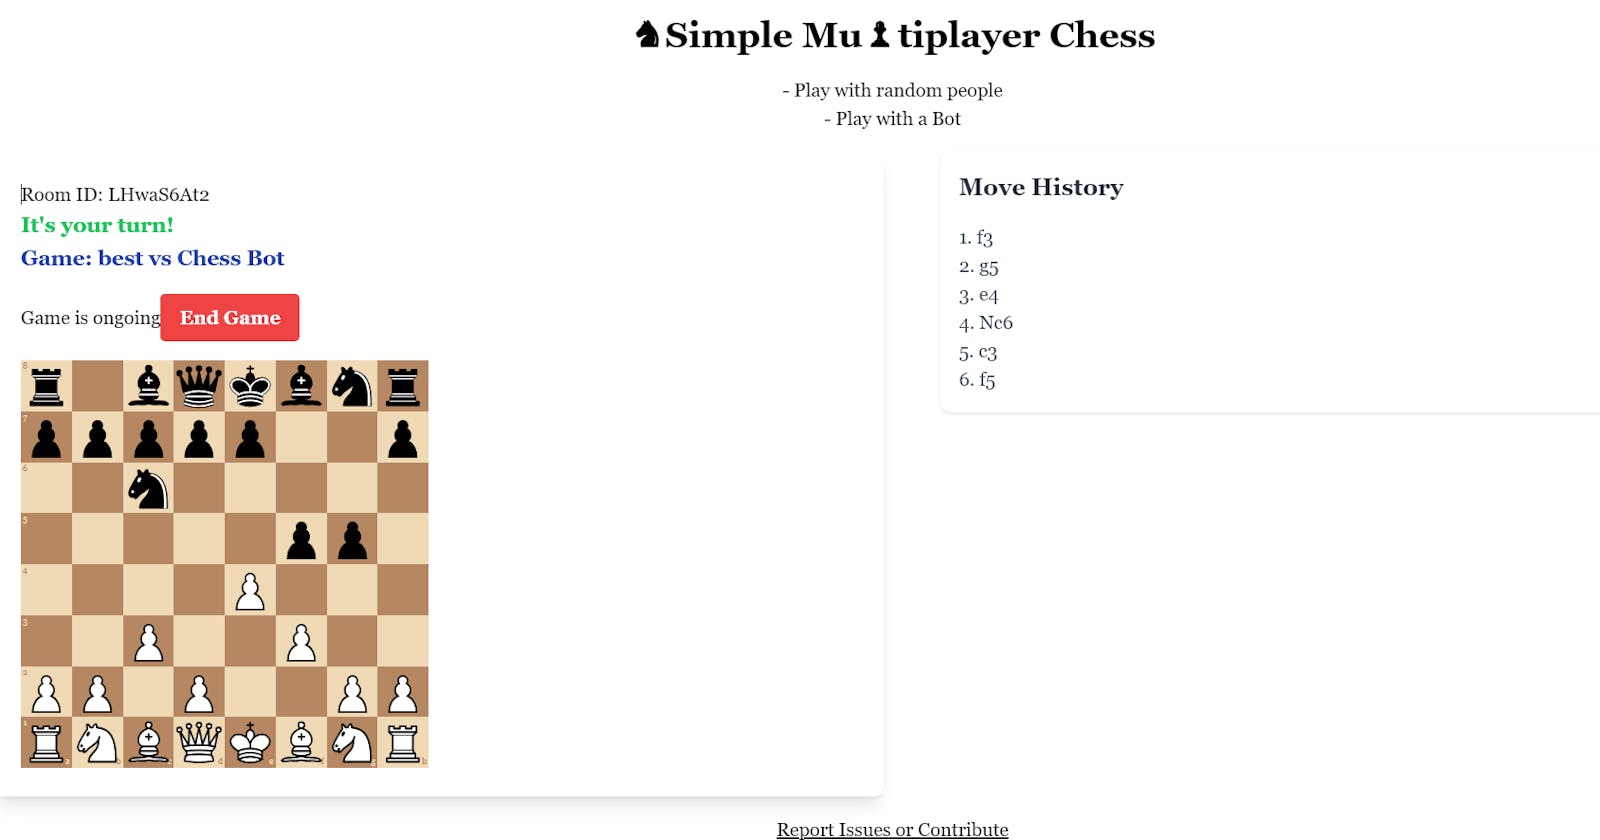 4 Problems in writing a clean Chess Multiplayer game in JavaScript.